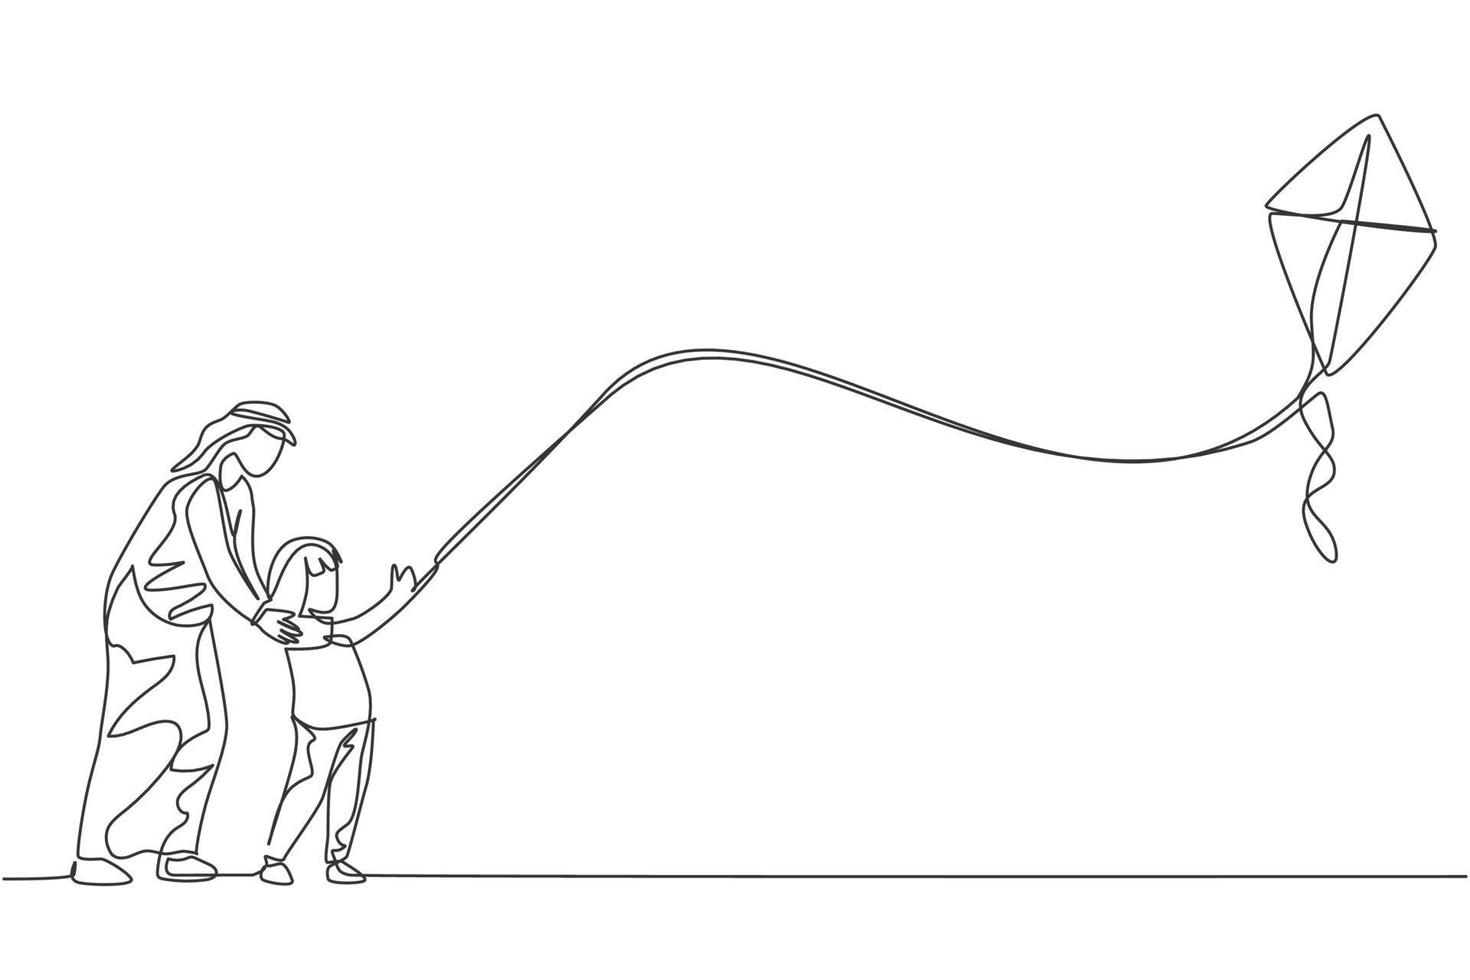 One continuous line drawing of young Arabian dan nad daughter flying kite together at outdoor field. Happy Islamic muslim parenting family concept. Dynamic single line draw design vector illustration